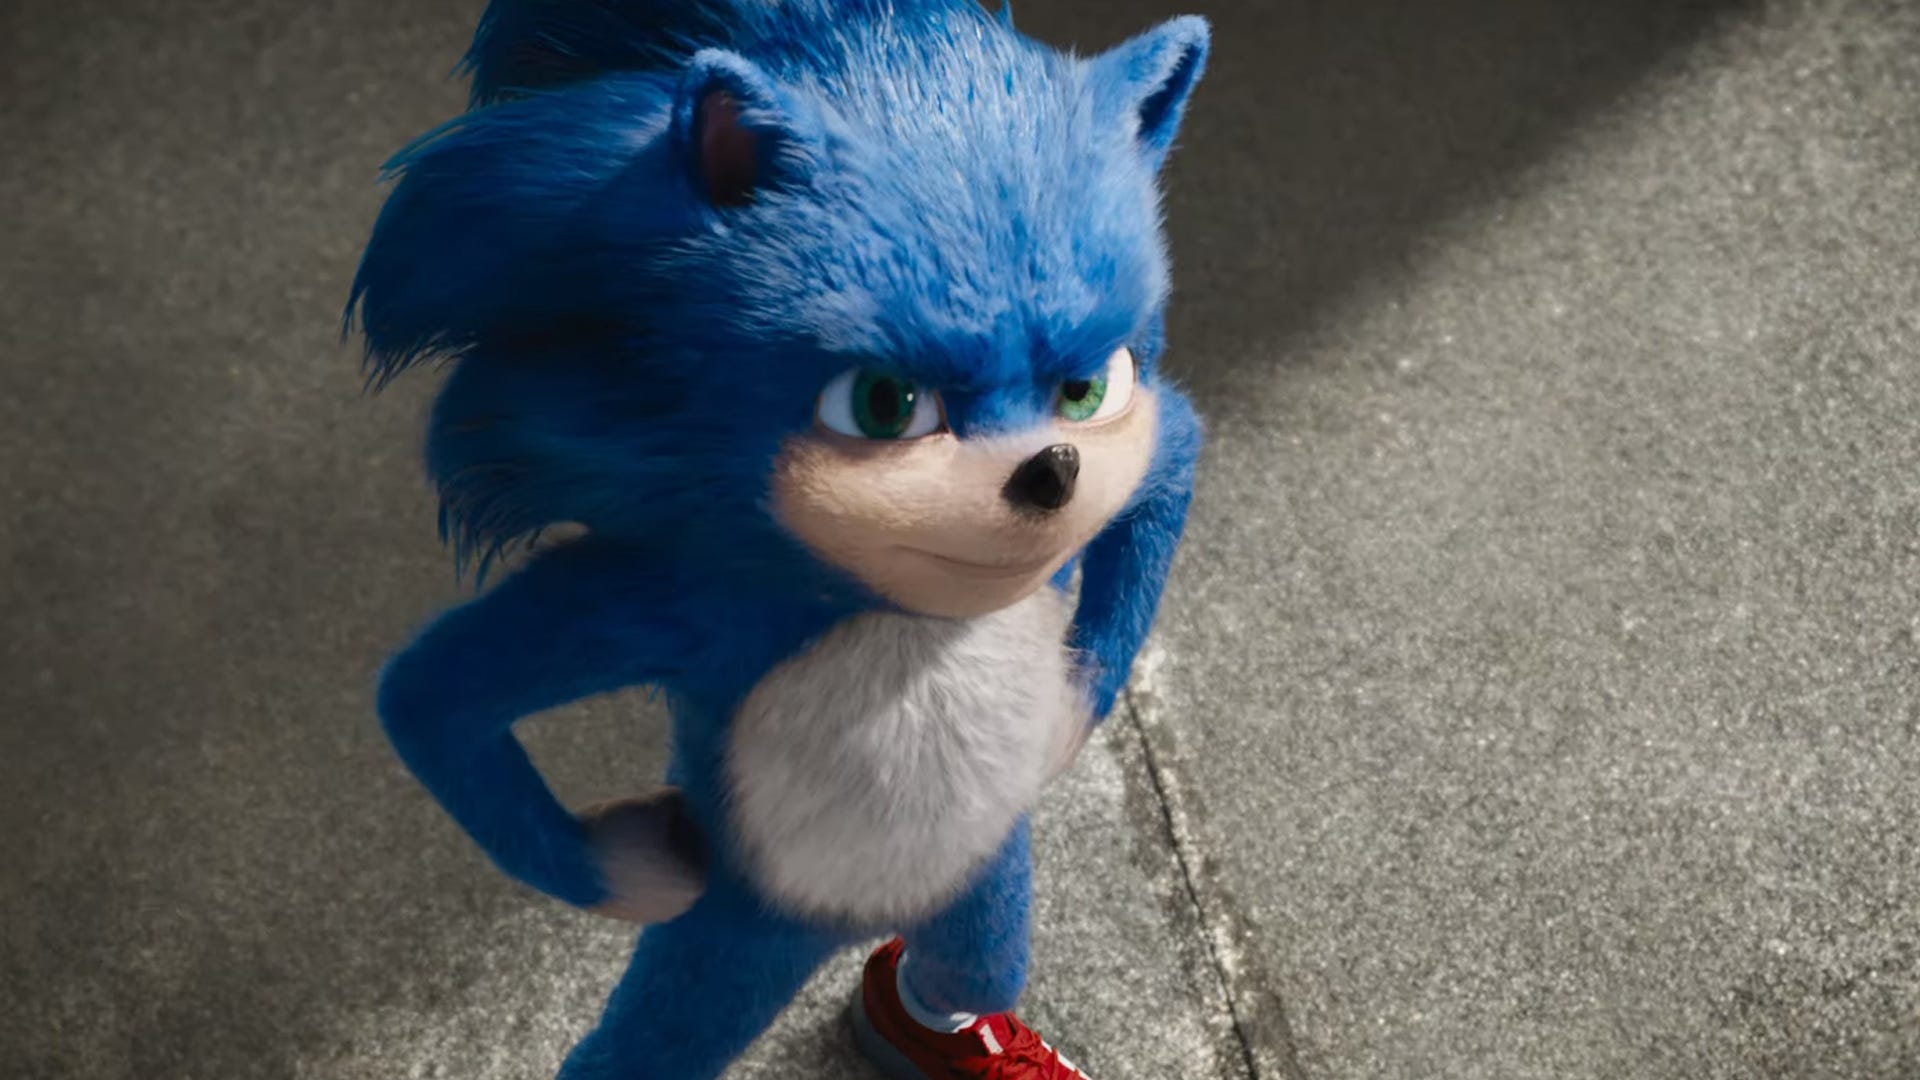 Sonic the Hedgehog 2' Announcement Video Teases New Character's  Game-changing Introduction